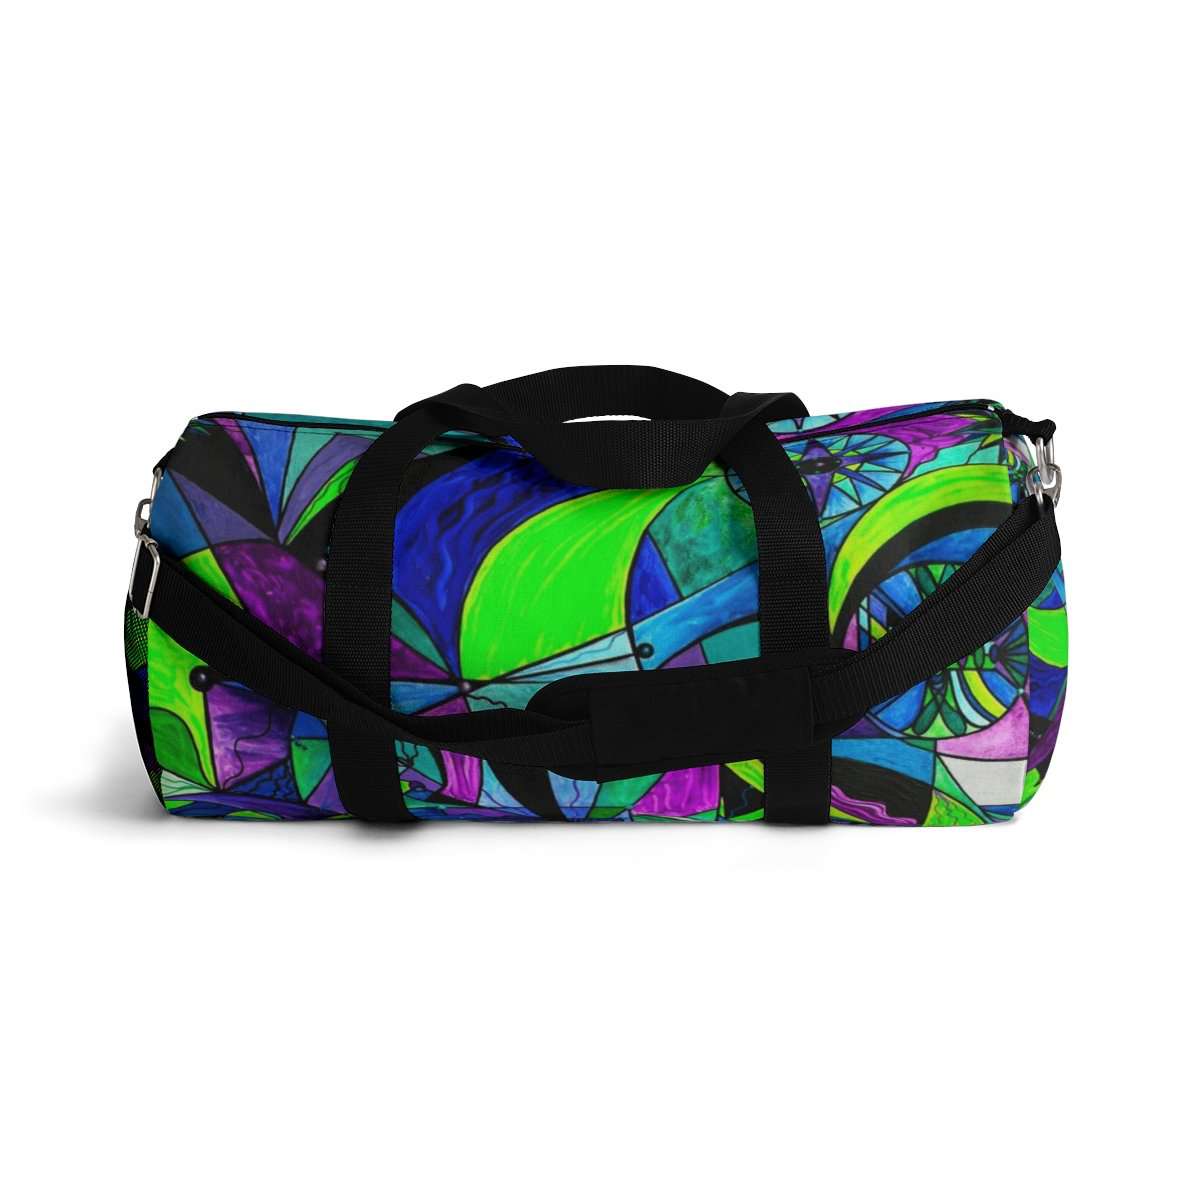 shop-online-and-get-your-favourite-arcturian-astral-travel-grid-duffle-bag-online_3.jpg